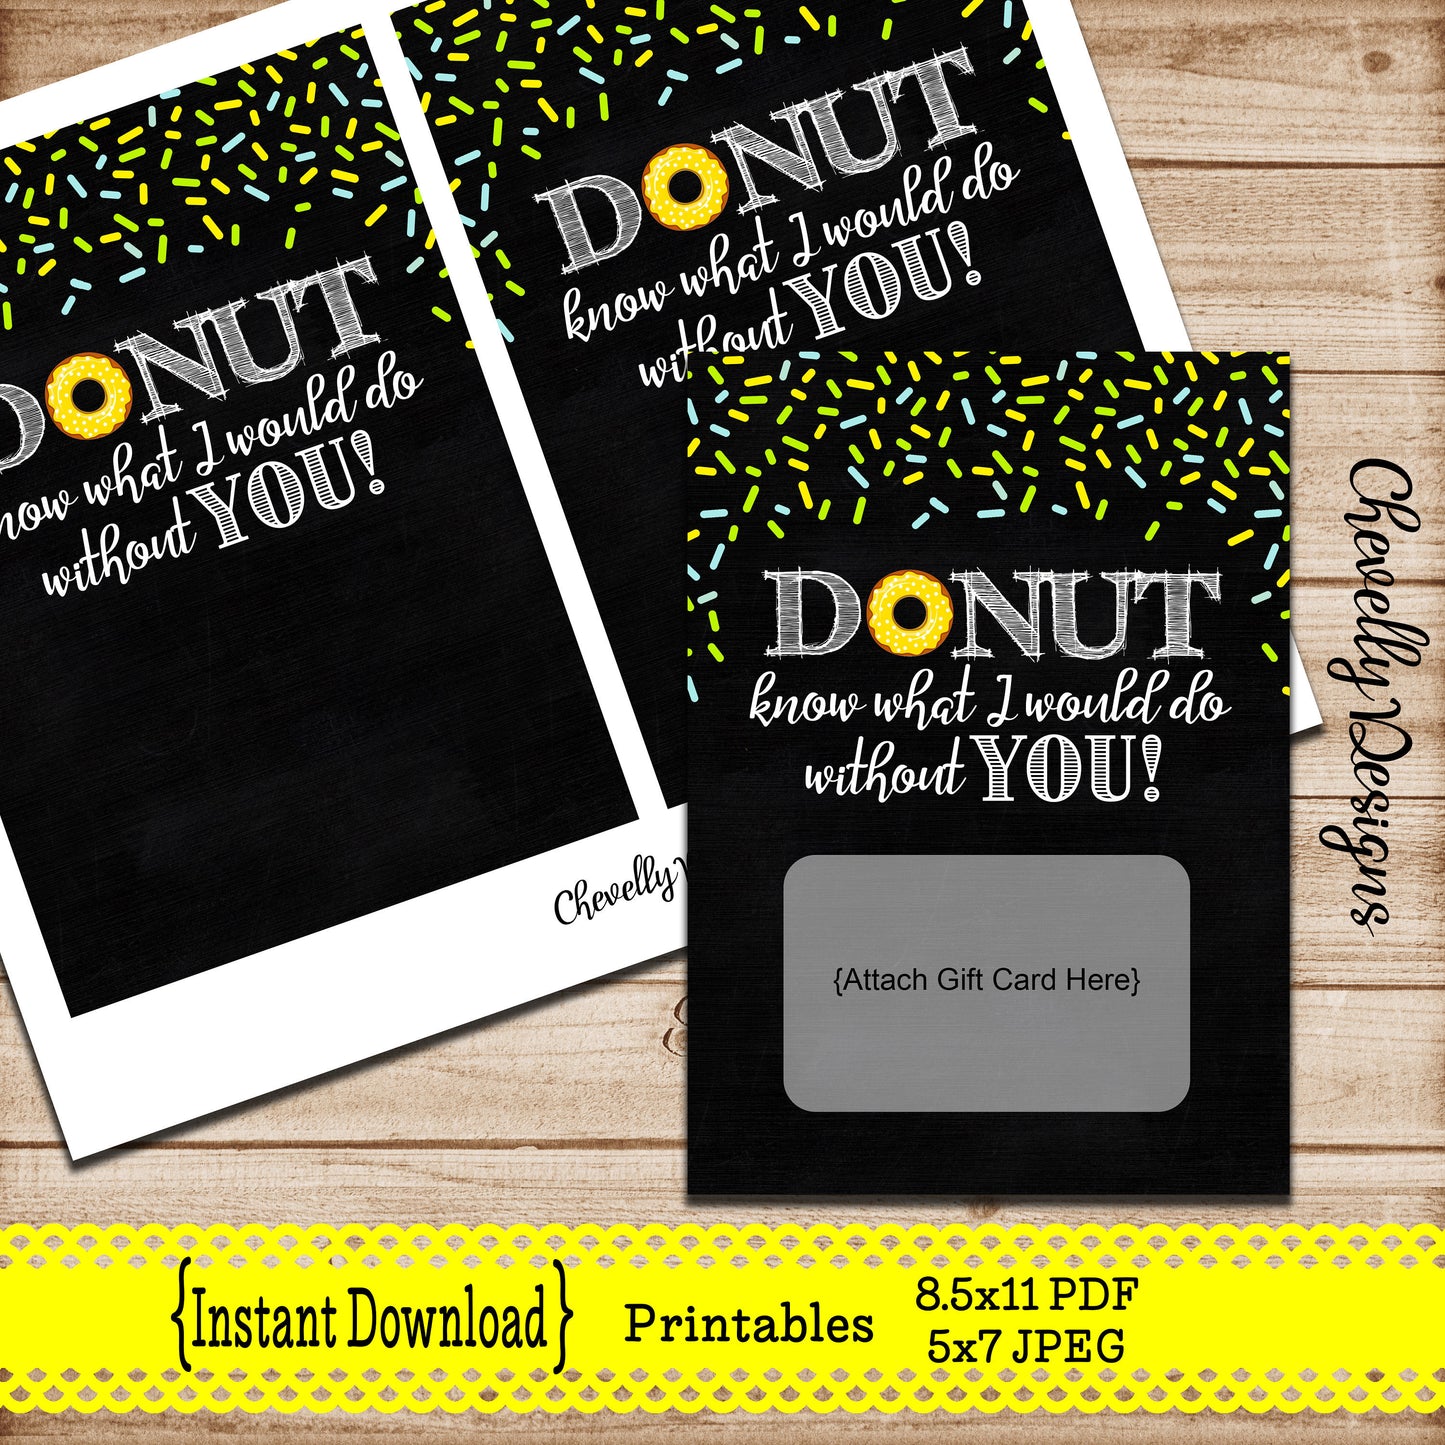 Printable 5x7 Donut Store Thank You Gift Card - Instant Digital Download